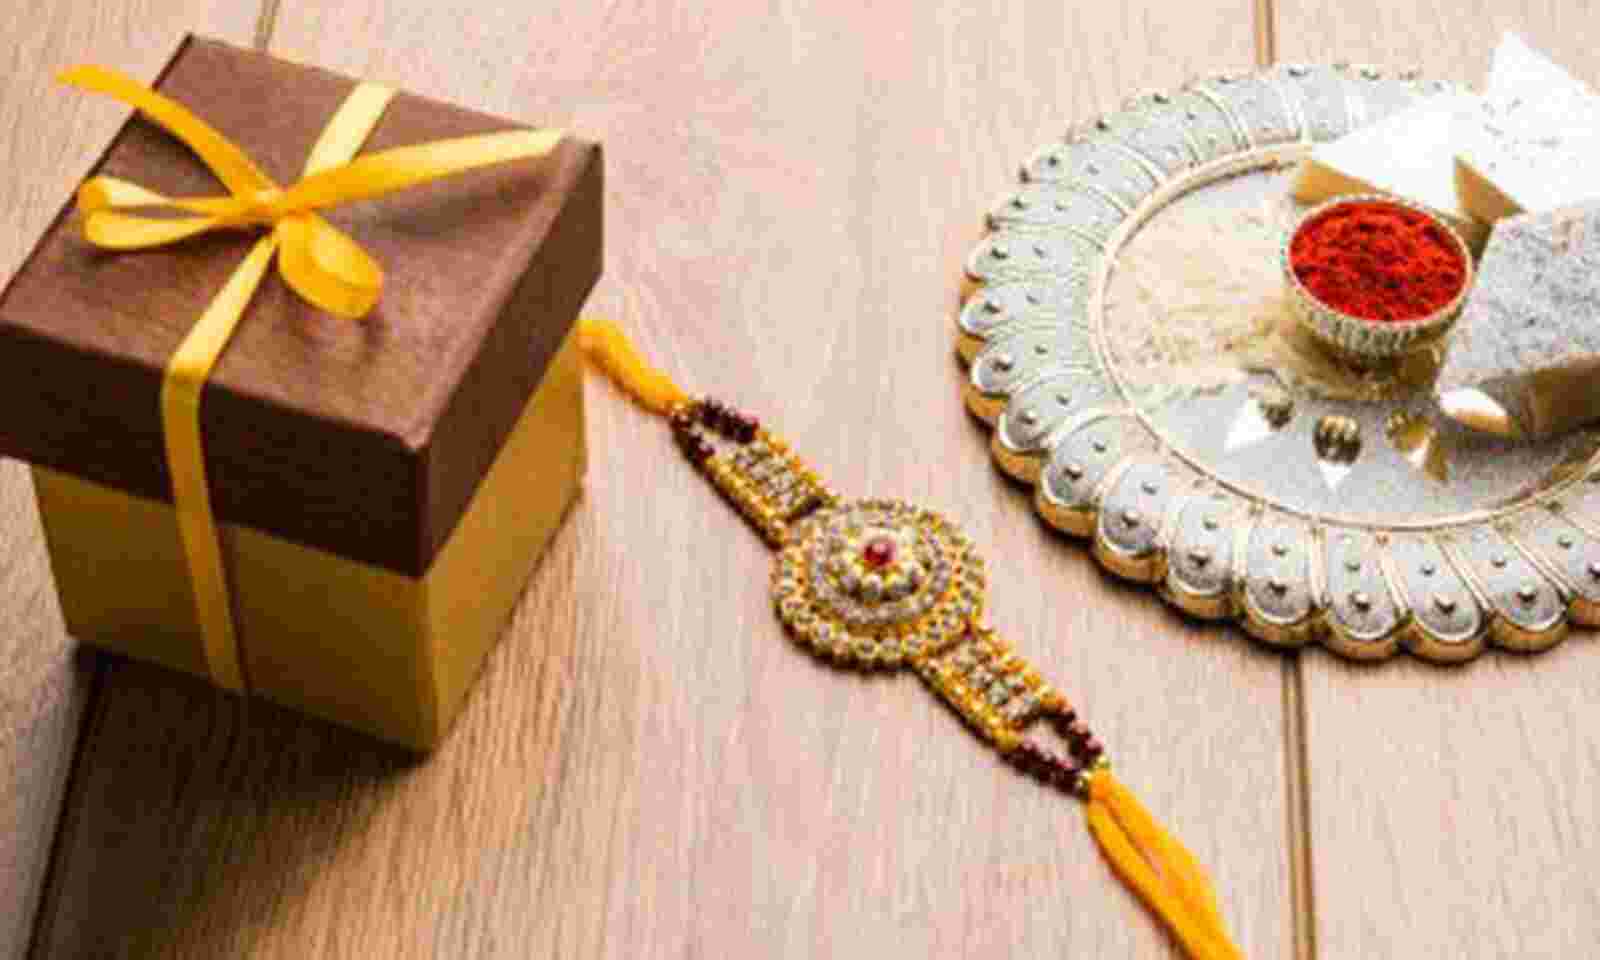 15 Best Raksha Bandhan Gifts Ideas 2021: Rakhi Gifts for Sisters and  Brothers you can buy Online and Offline